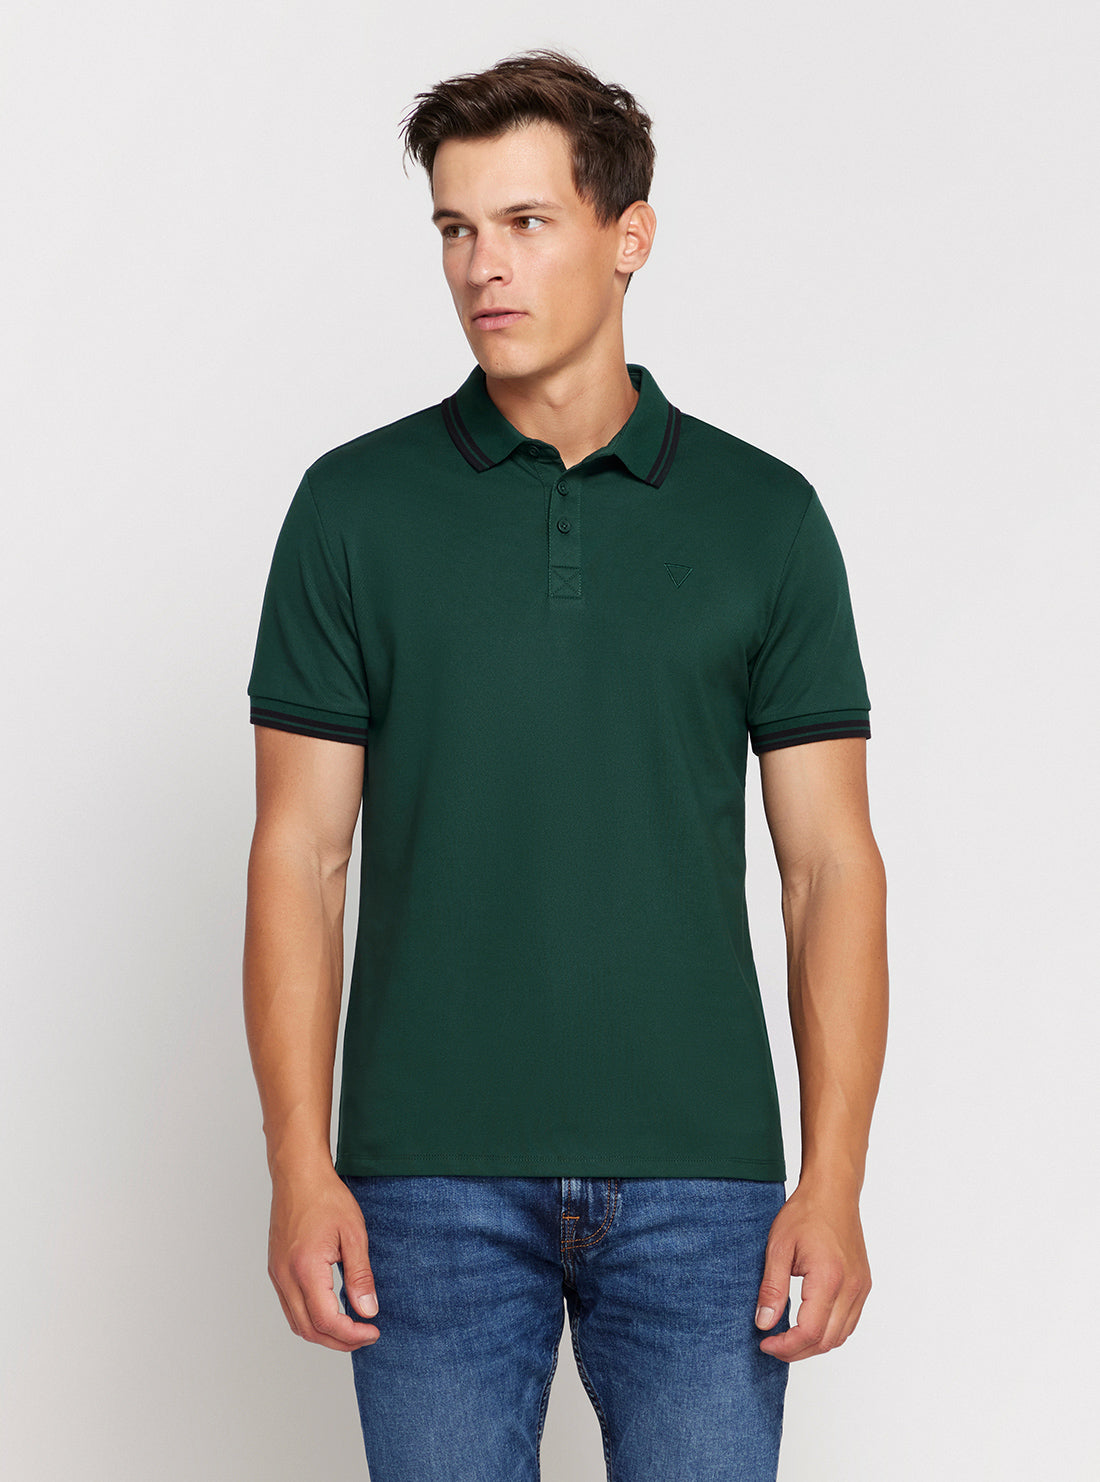 GUESS Green Short Sleeve Pique Polo Shirt front view